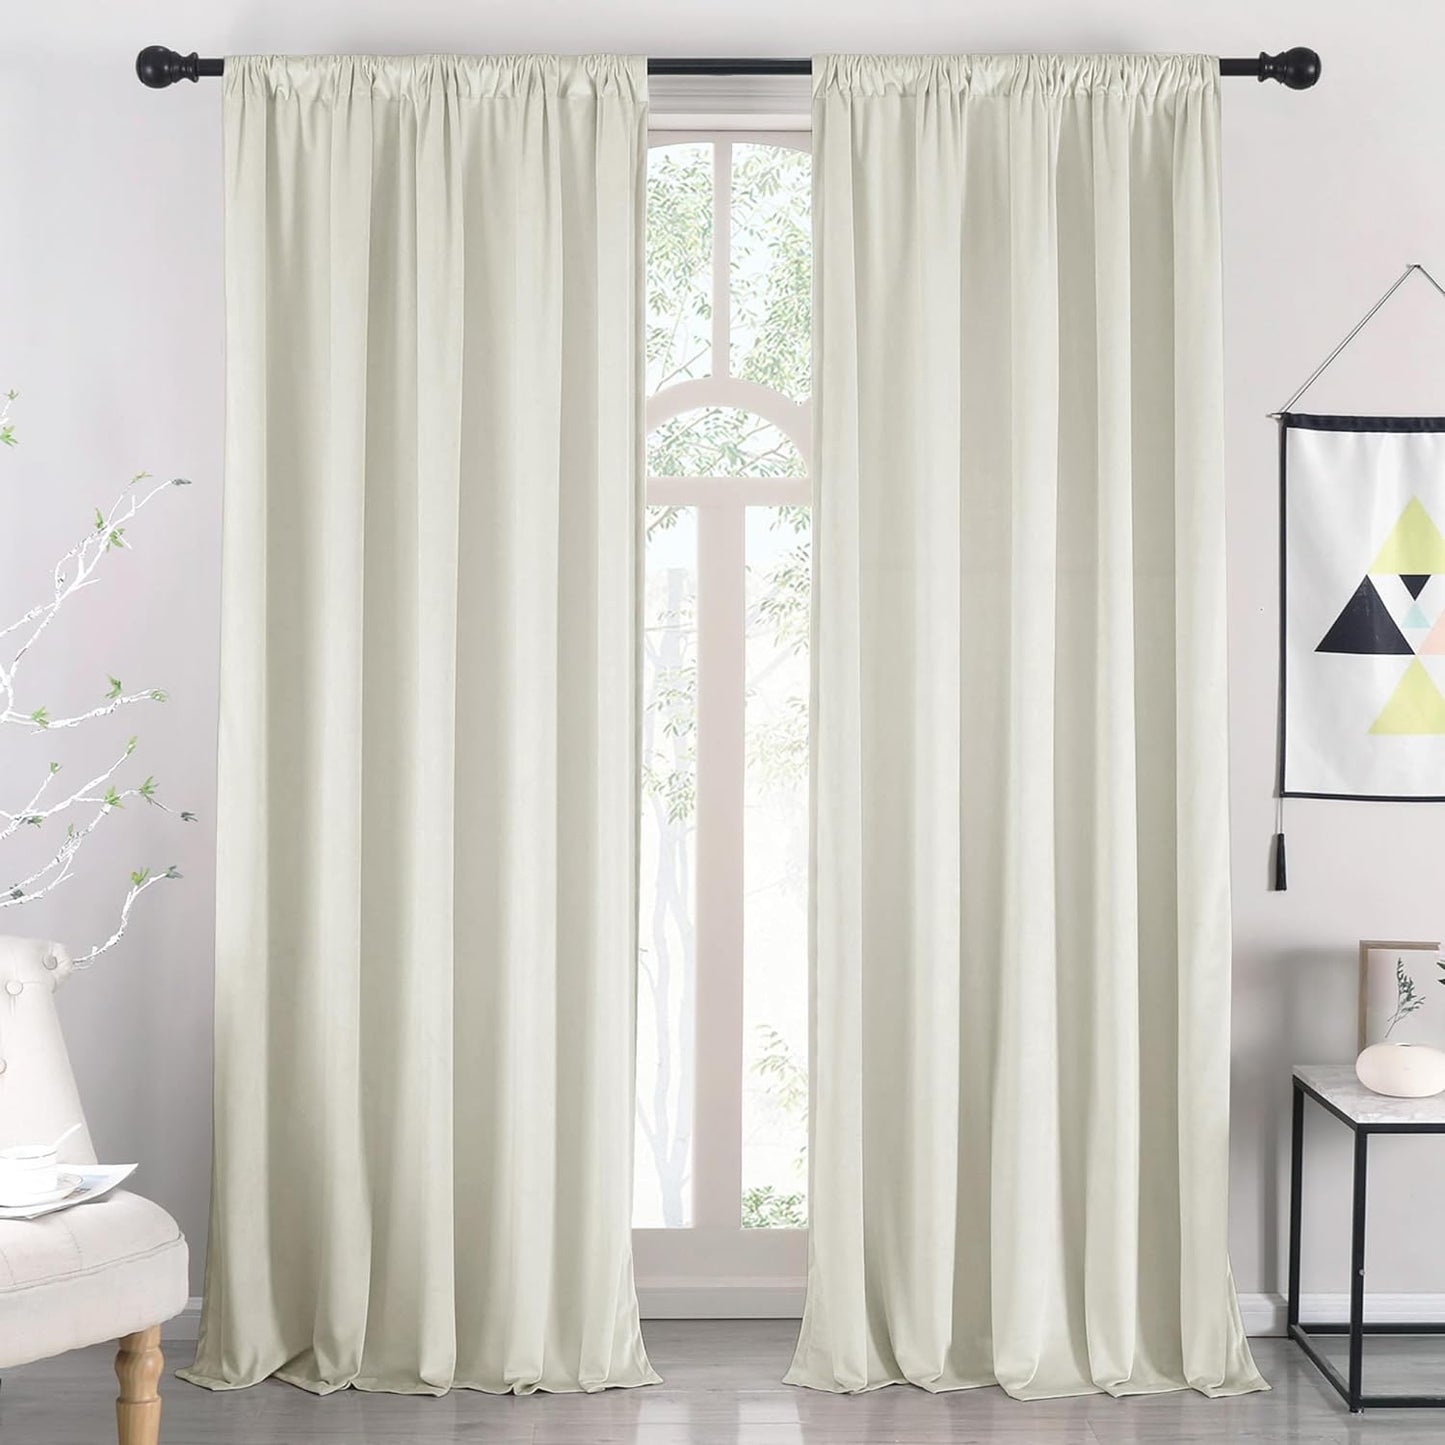 Nanbowang Green Velvet Curtains 63 Inches Long Dark Green Light Blocking Rod Pocket Window Curtain Panels Set of 2 Heat Insulated Curtains Thermal Curtain Panels for Bedroom  nanbowang Cream 52"X72" 